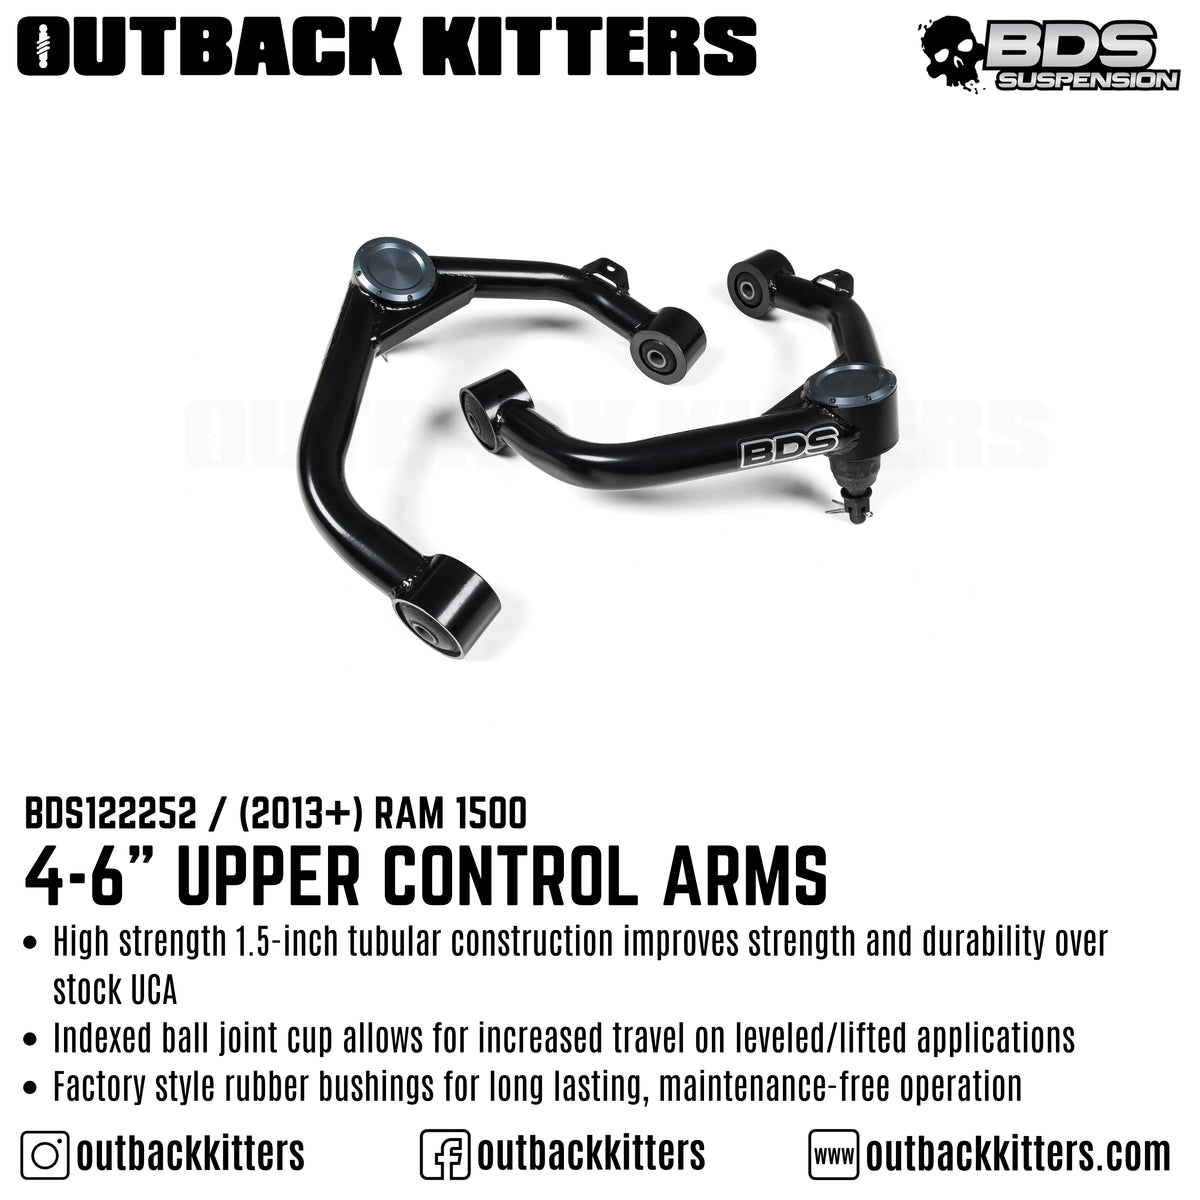 BDS Suspension 2013+ 4-6" Lift Upper Control Arms - Outback Kitters